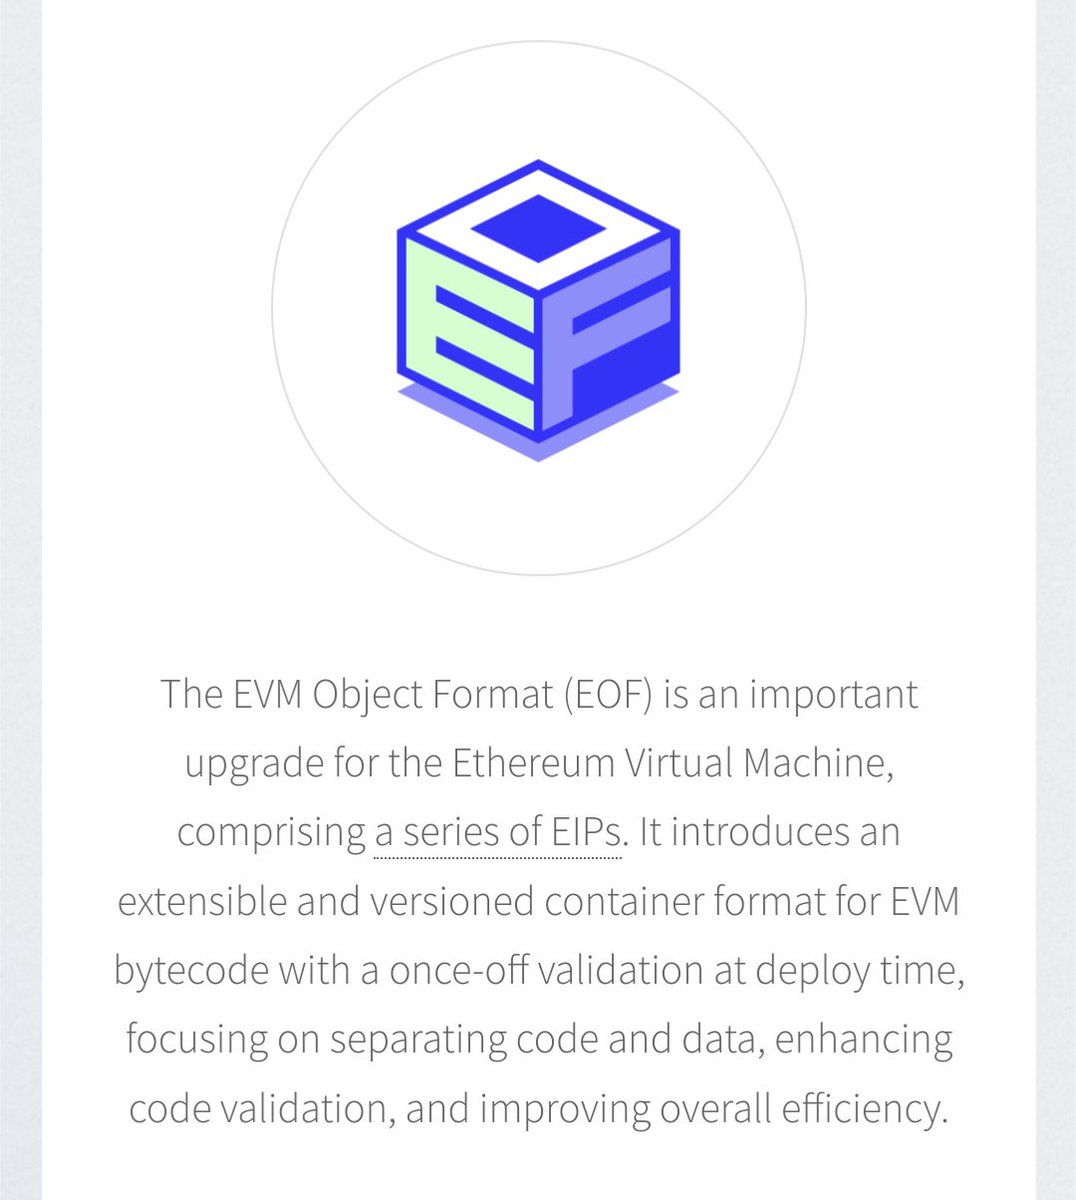 'The EVM is like JavaScript: not that good, but very sticky.' That's changing with EOF (EVM Object Format)--a set of EIPs that upgrade the EVM's control flow, validation, and execution semantics. EOF is possibly the biggest change to the EVM in recent years and promises an equal